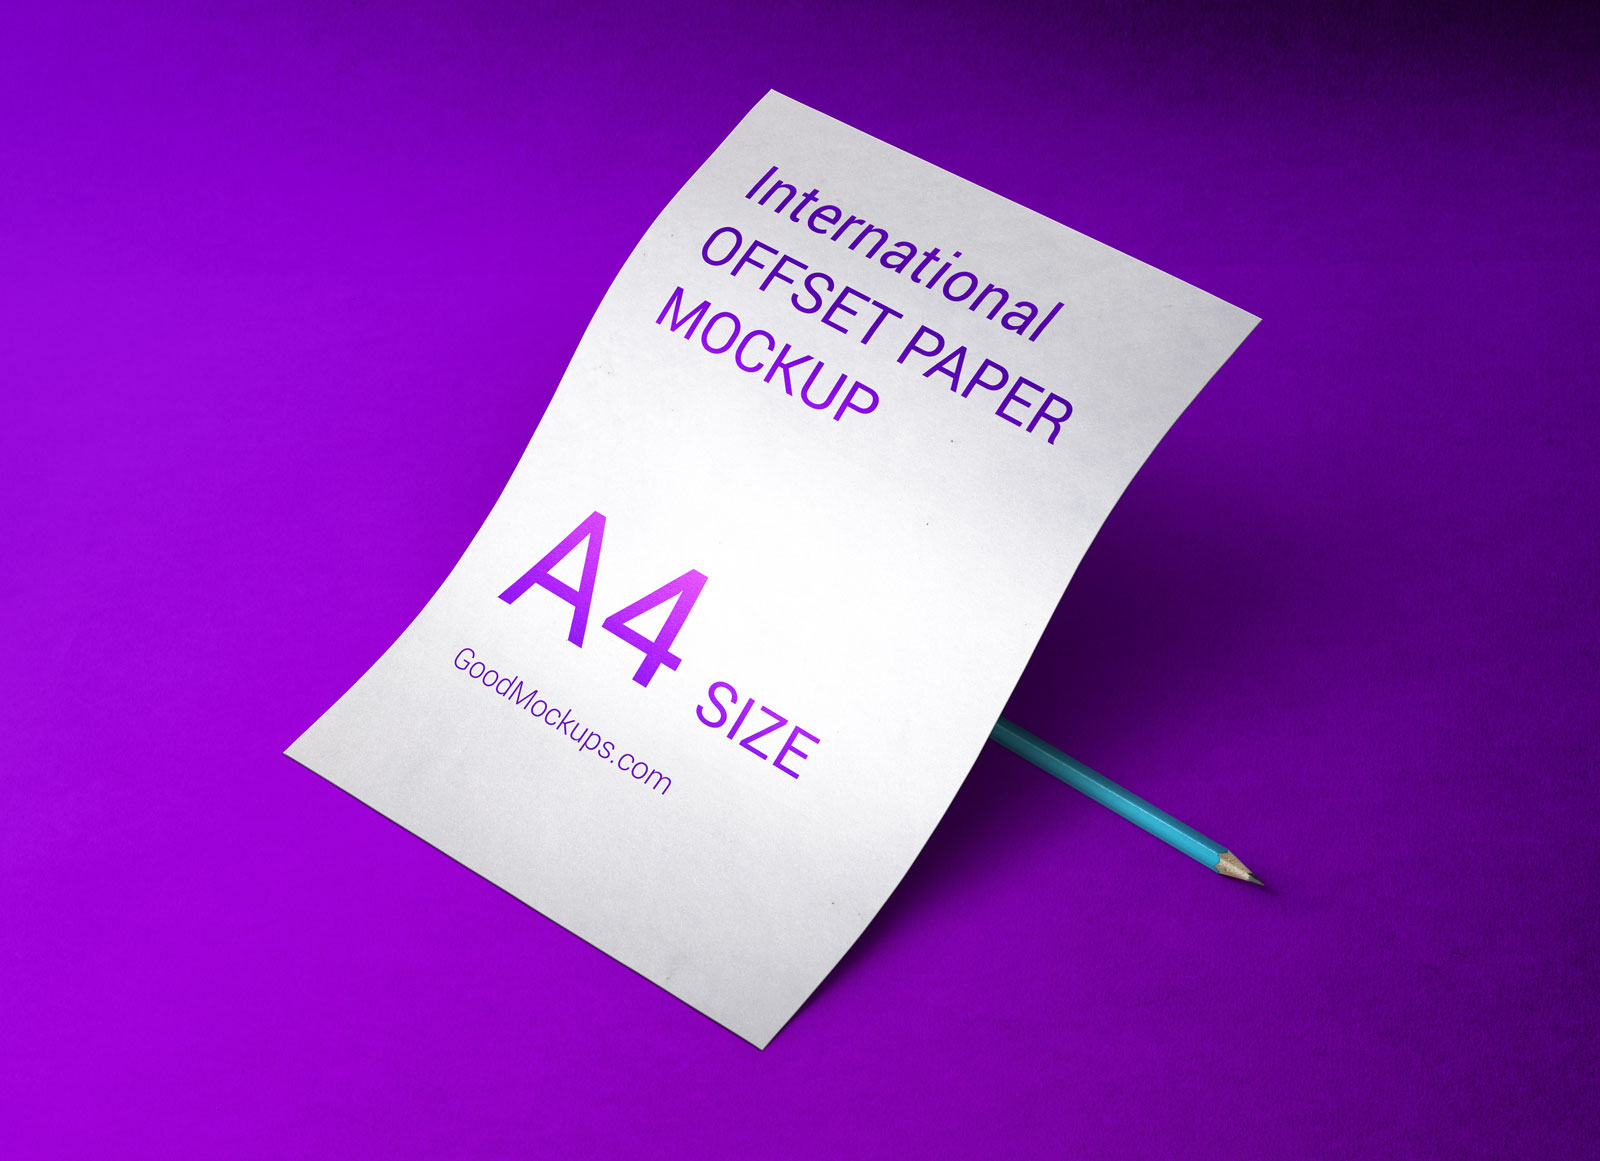 Free-A4-Offset-Paper-Mockup-PSD-For-Letterhead-Designs